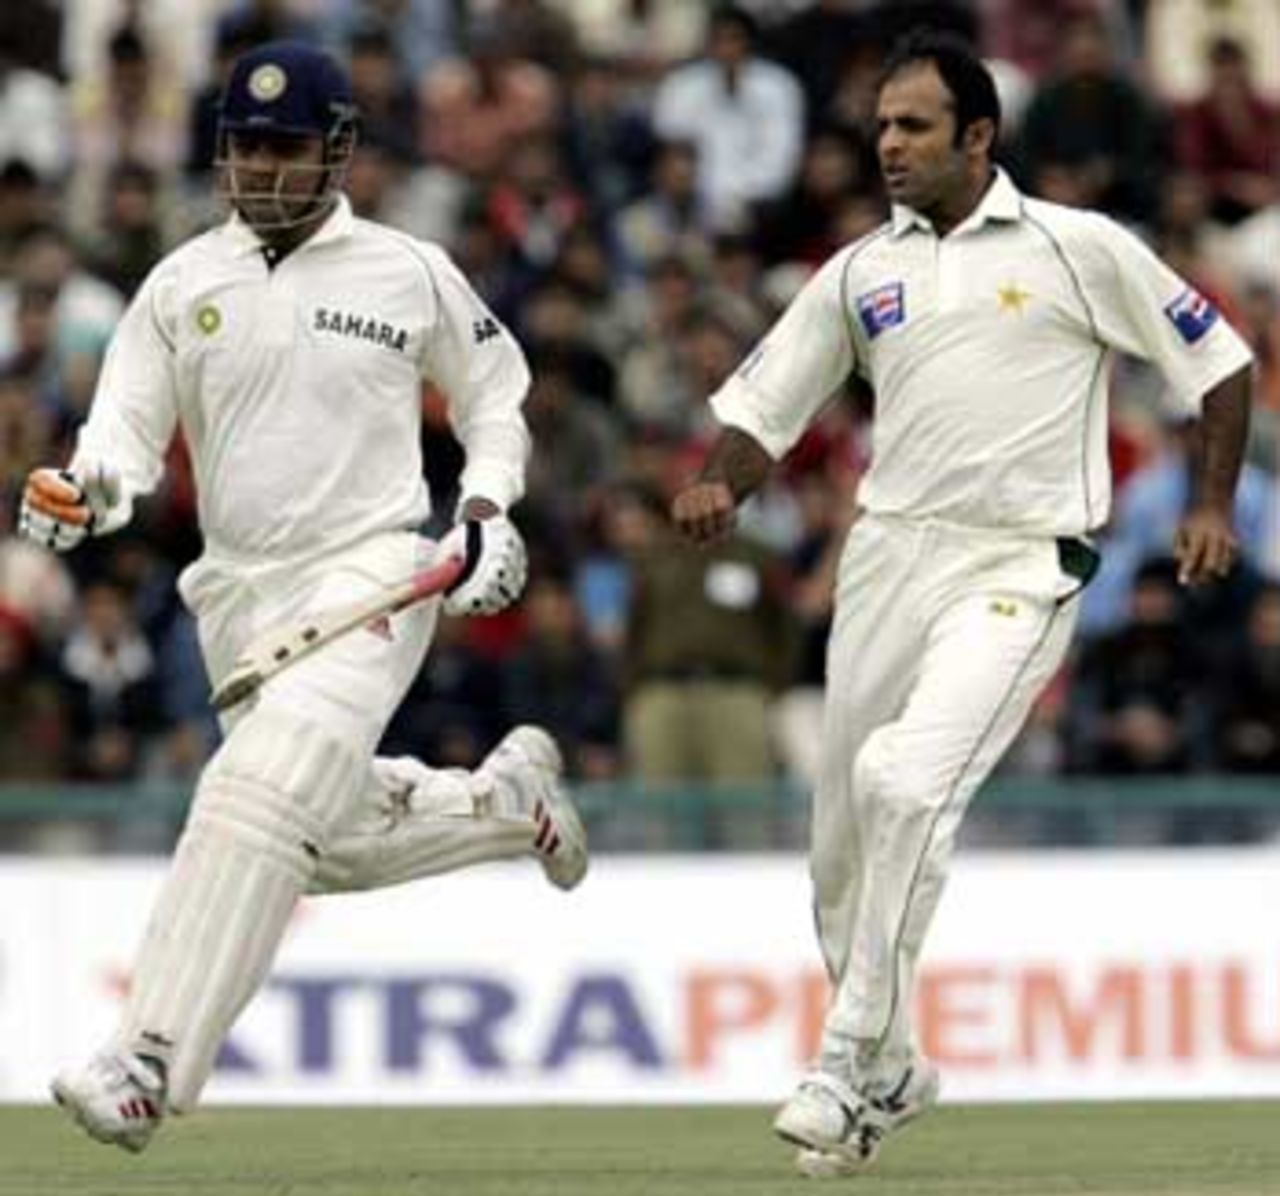 A rare moment - Virender Sehwag running a single. He spent most of his innings crashing boundaries, India v Pakistan, 1st Test, Mohali, March 9, 2005